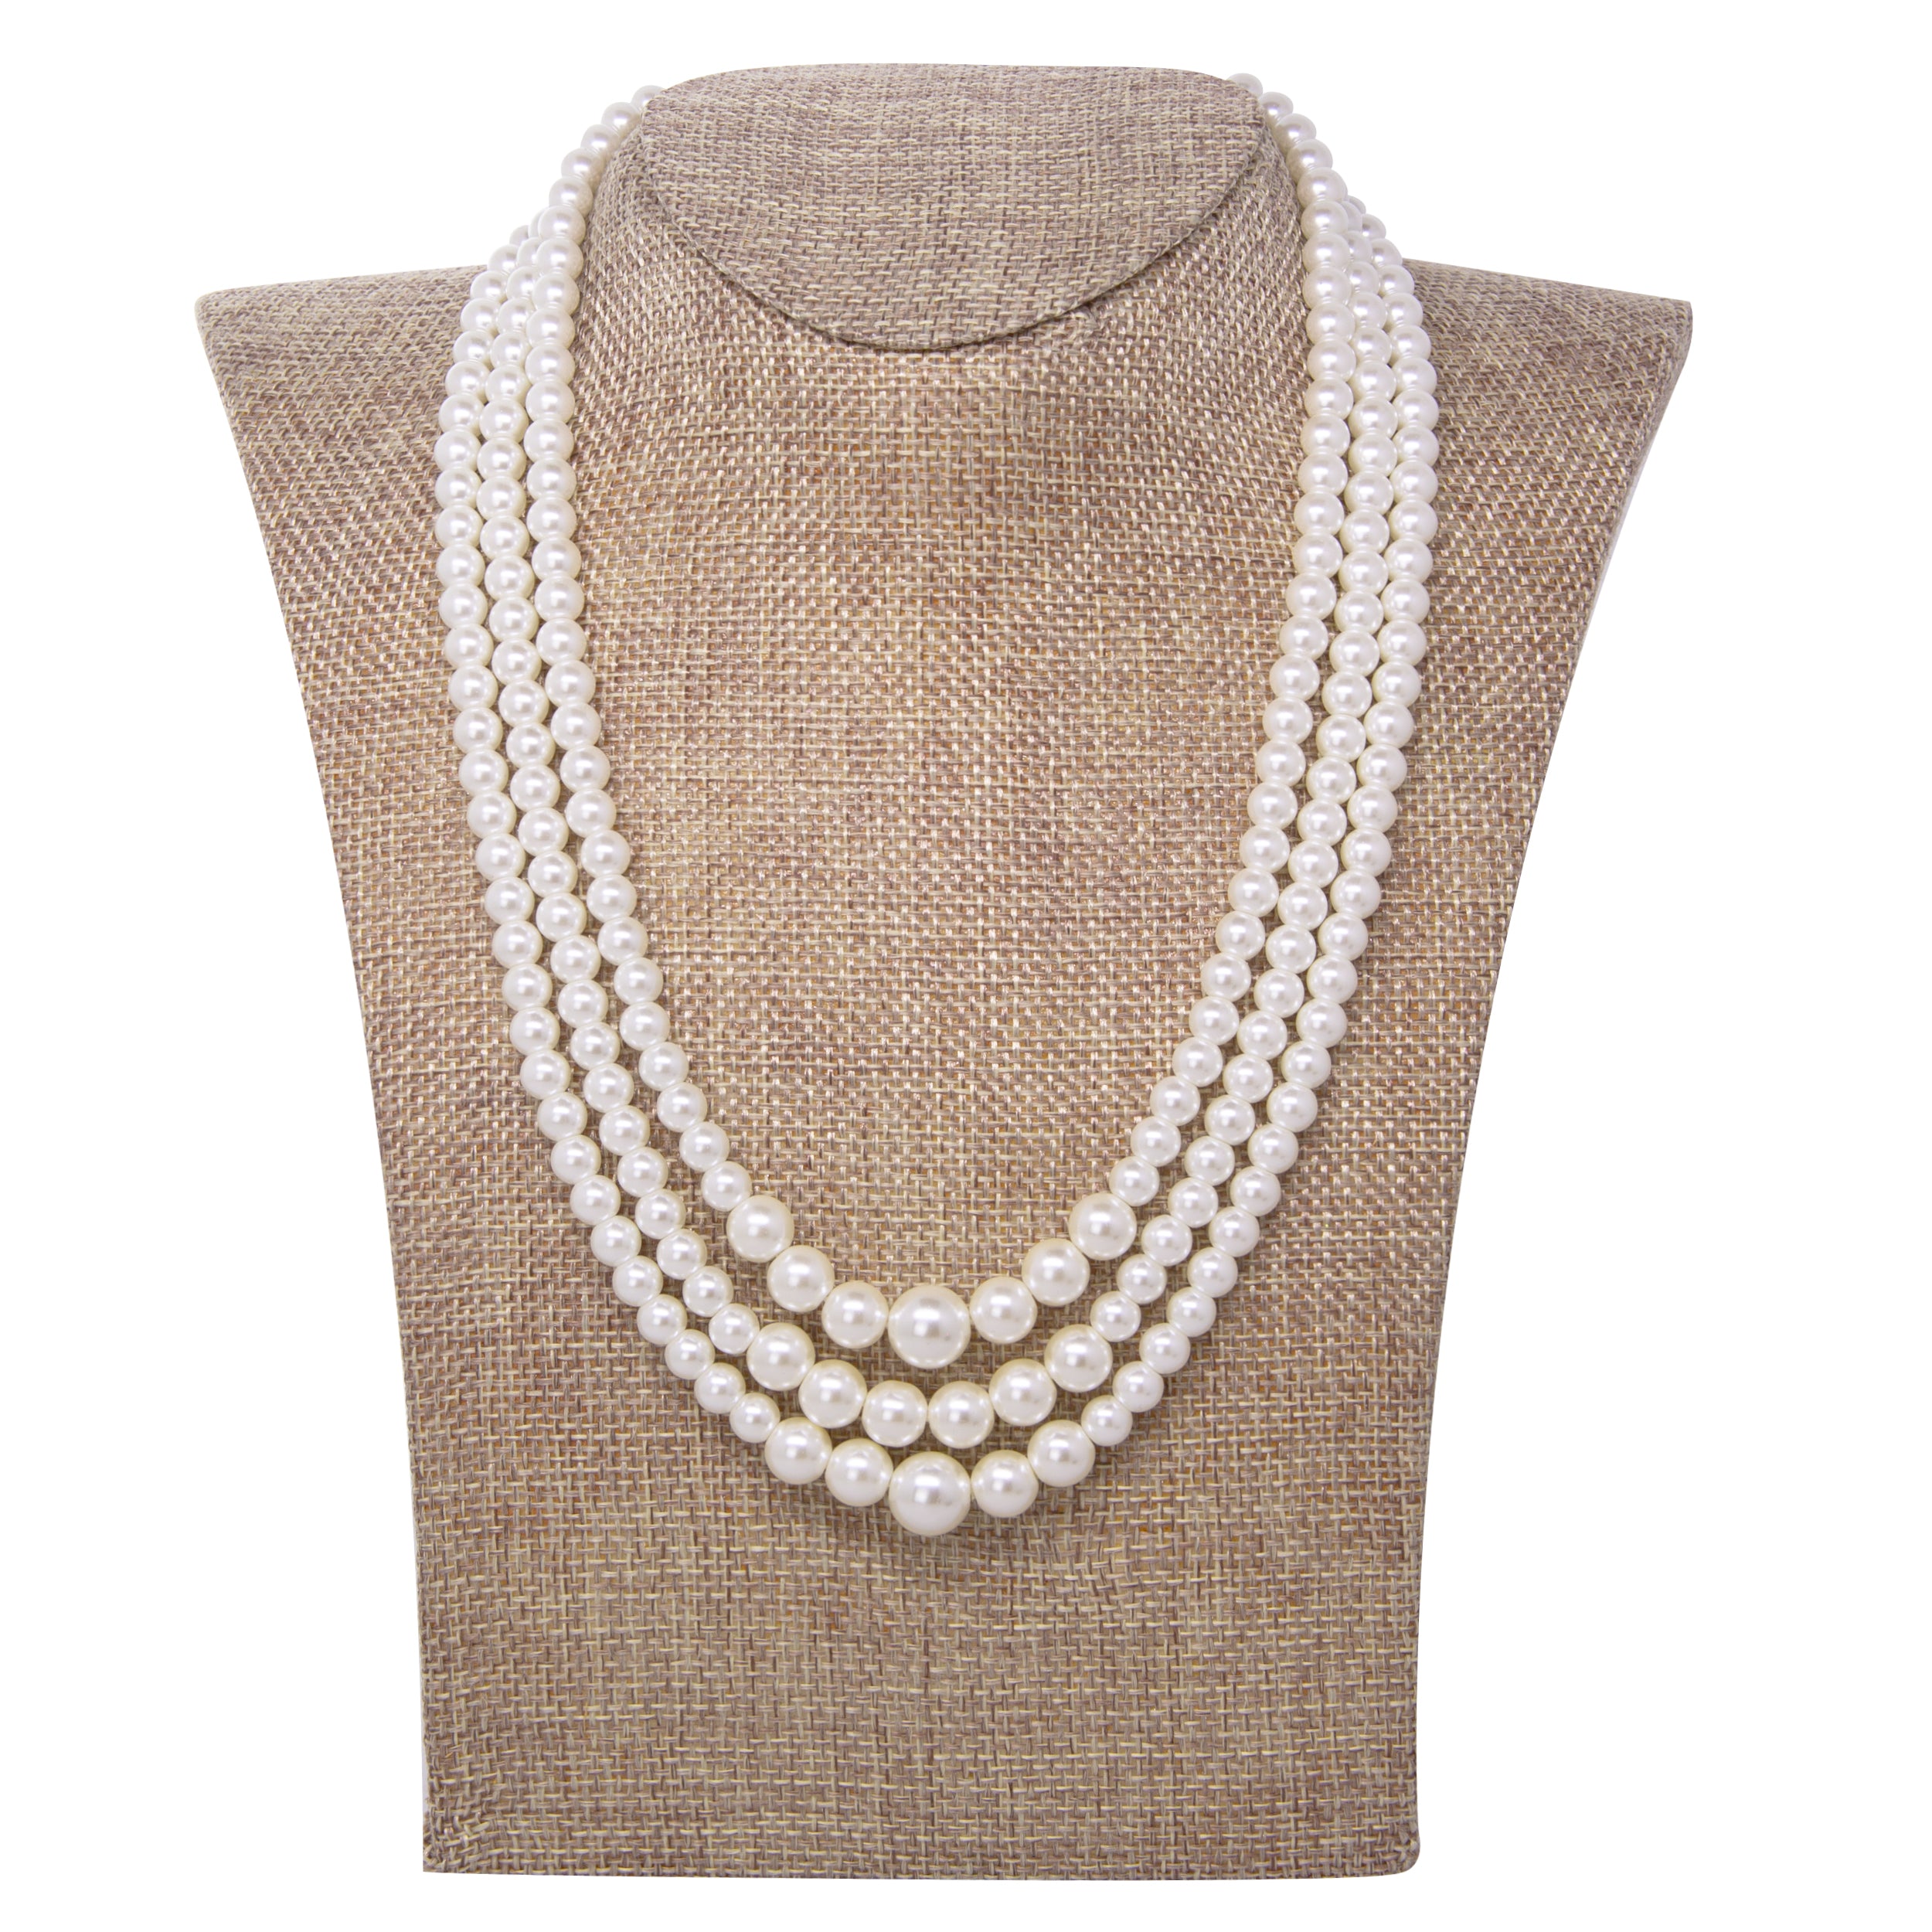 3-Strand Pearl Necklace | Adler's of New Orleans